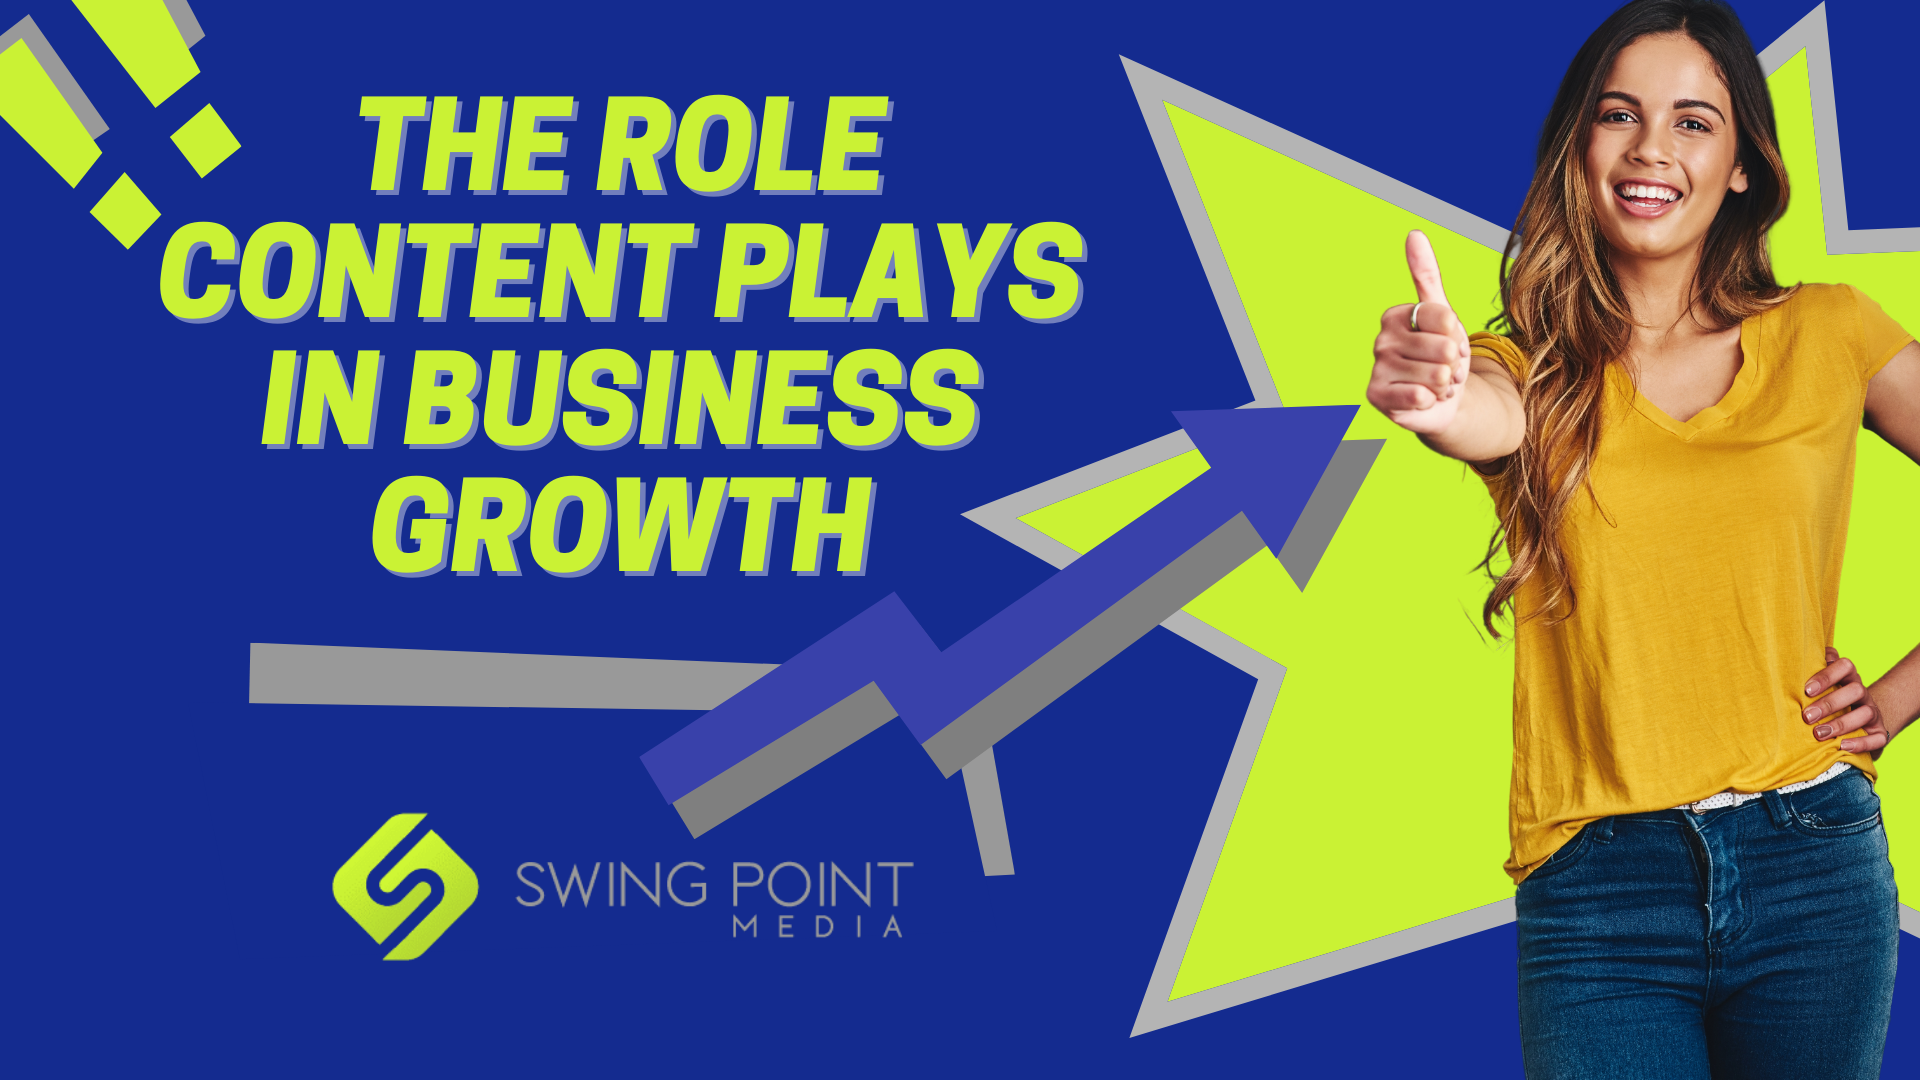 The Role Content Plays in Business Growth